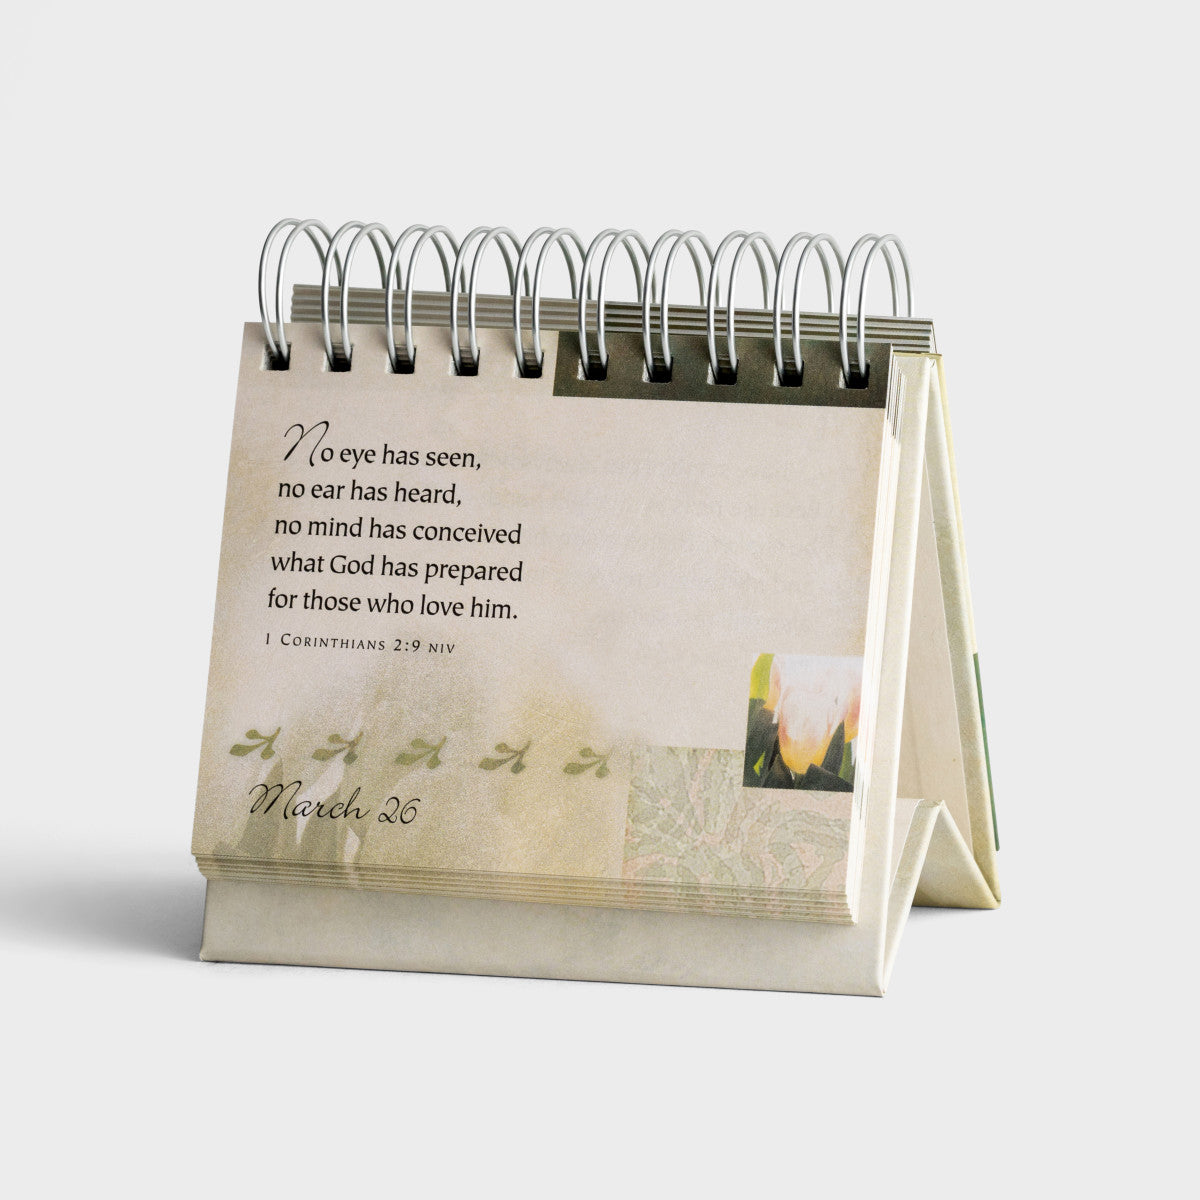 Promises And Blessings  - 365 Day Inspirational DayBrightener - The Christian Gift Company